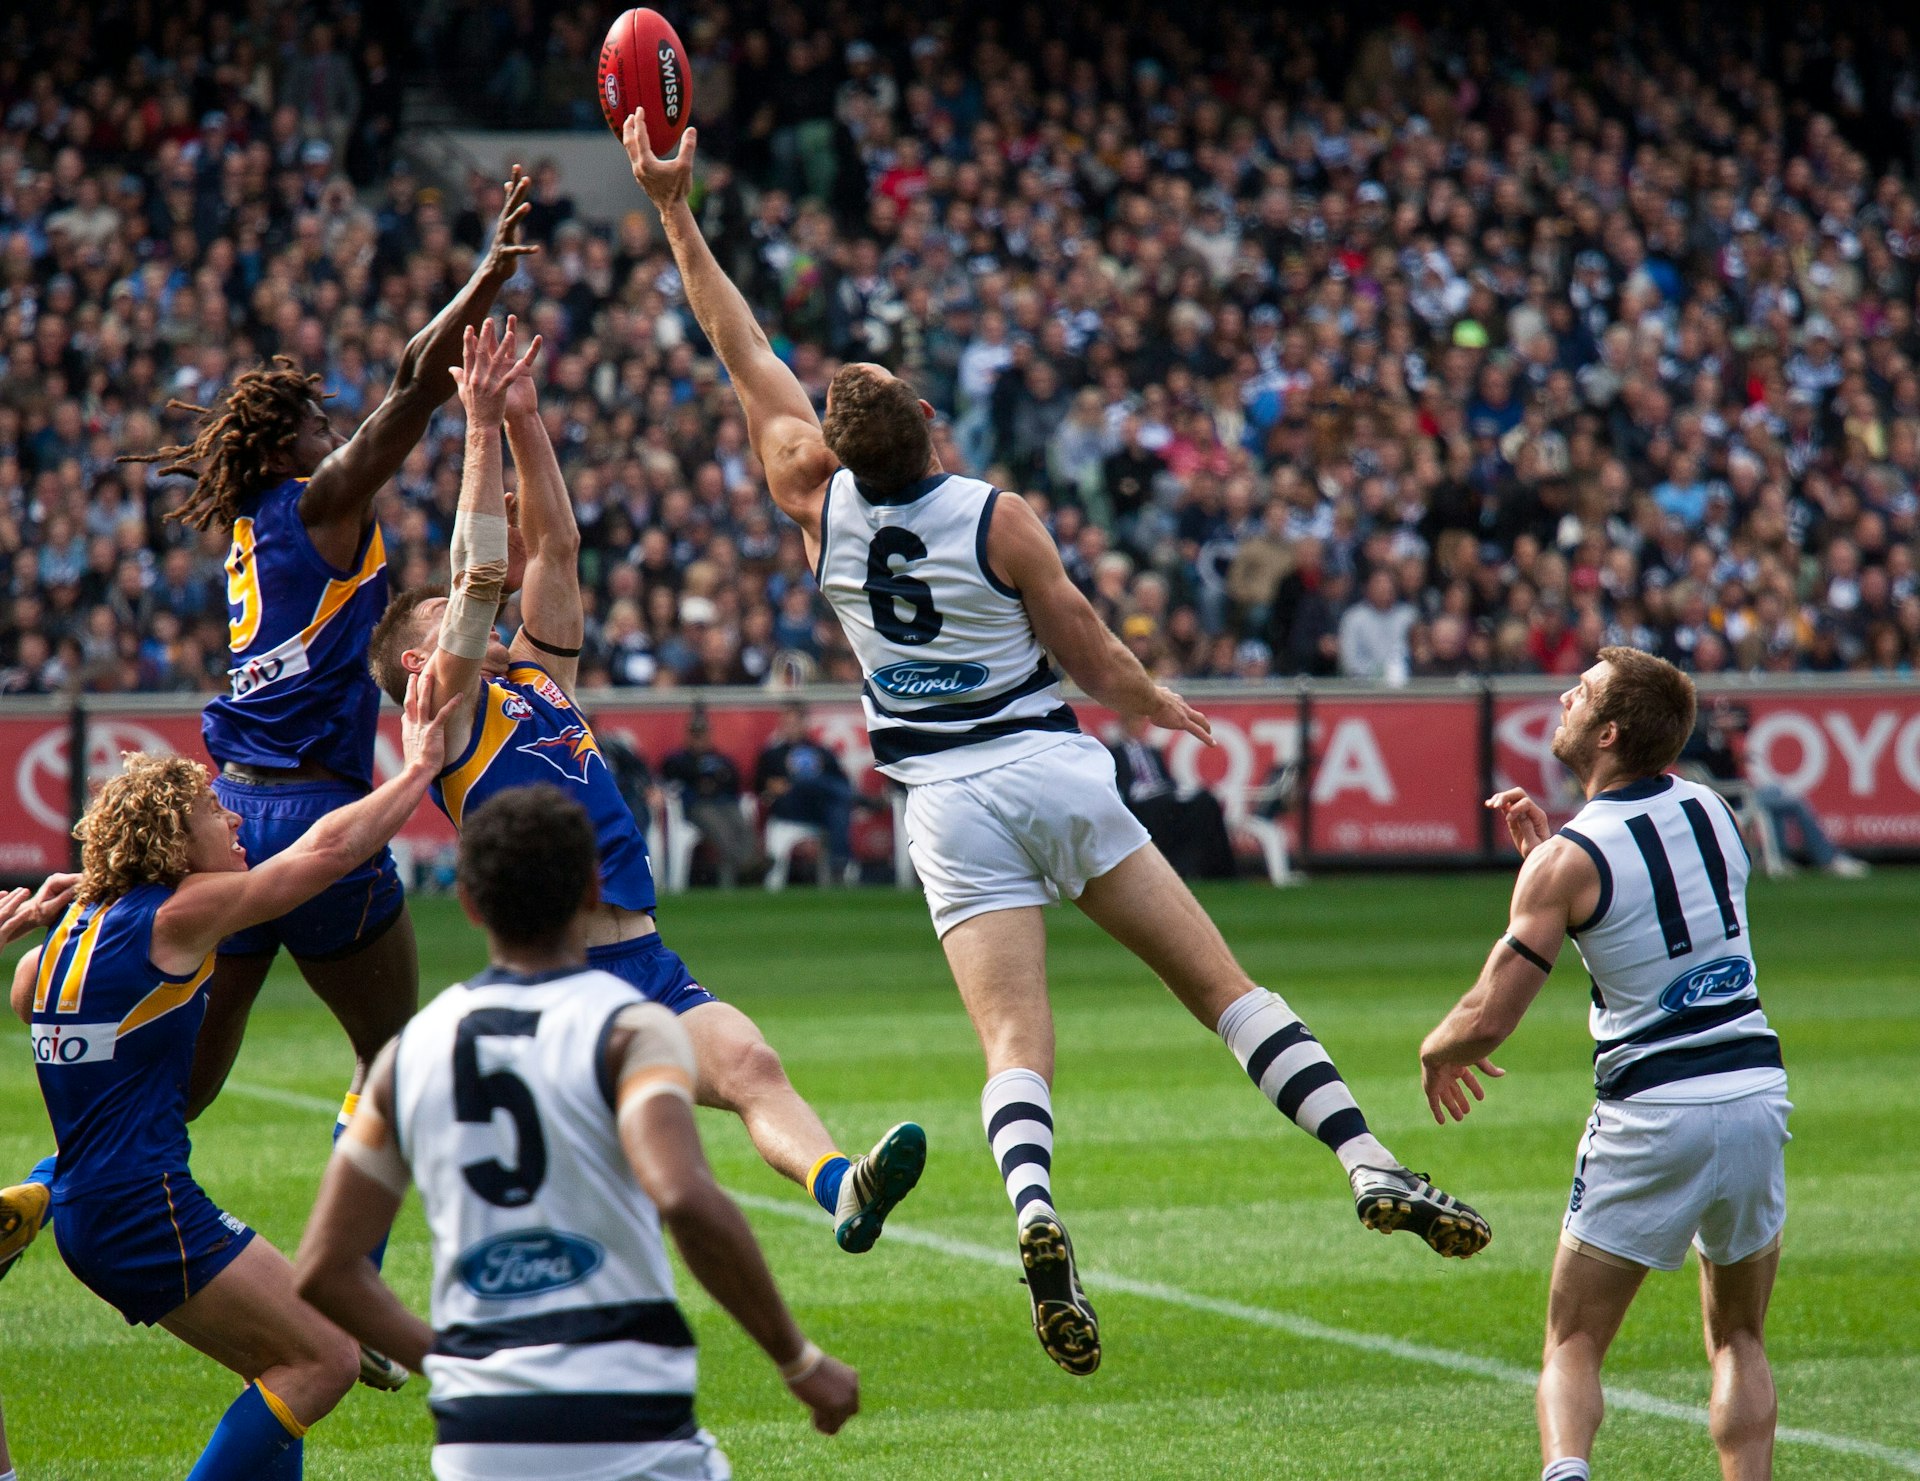 Brad Ottens (6) stretched for a ruck contest during Geelong's preliminary final win over West Coast on September 24, 2011